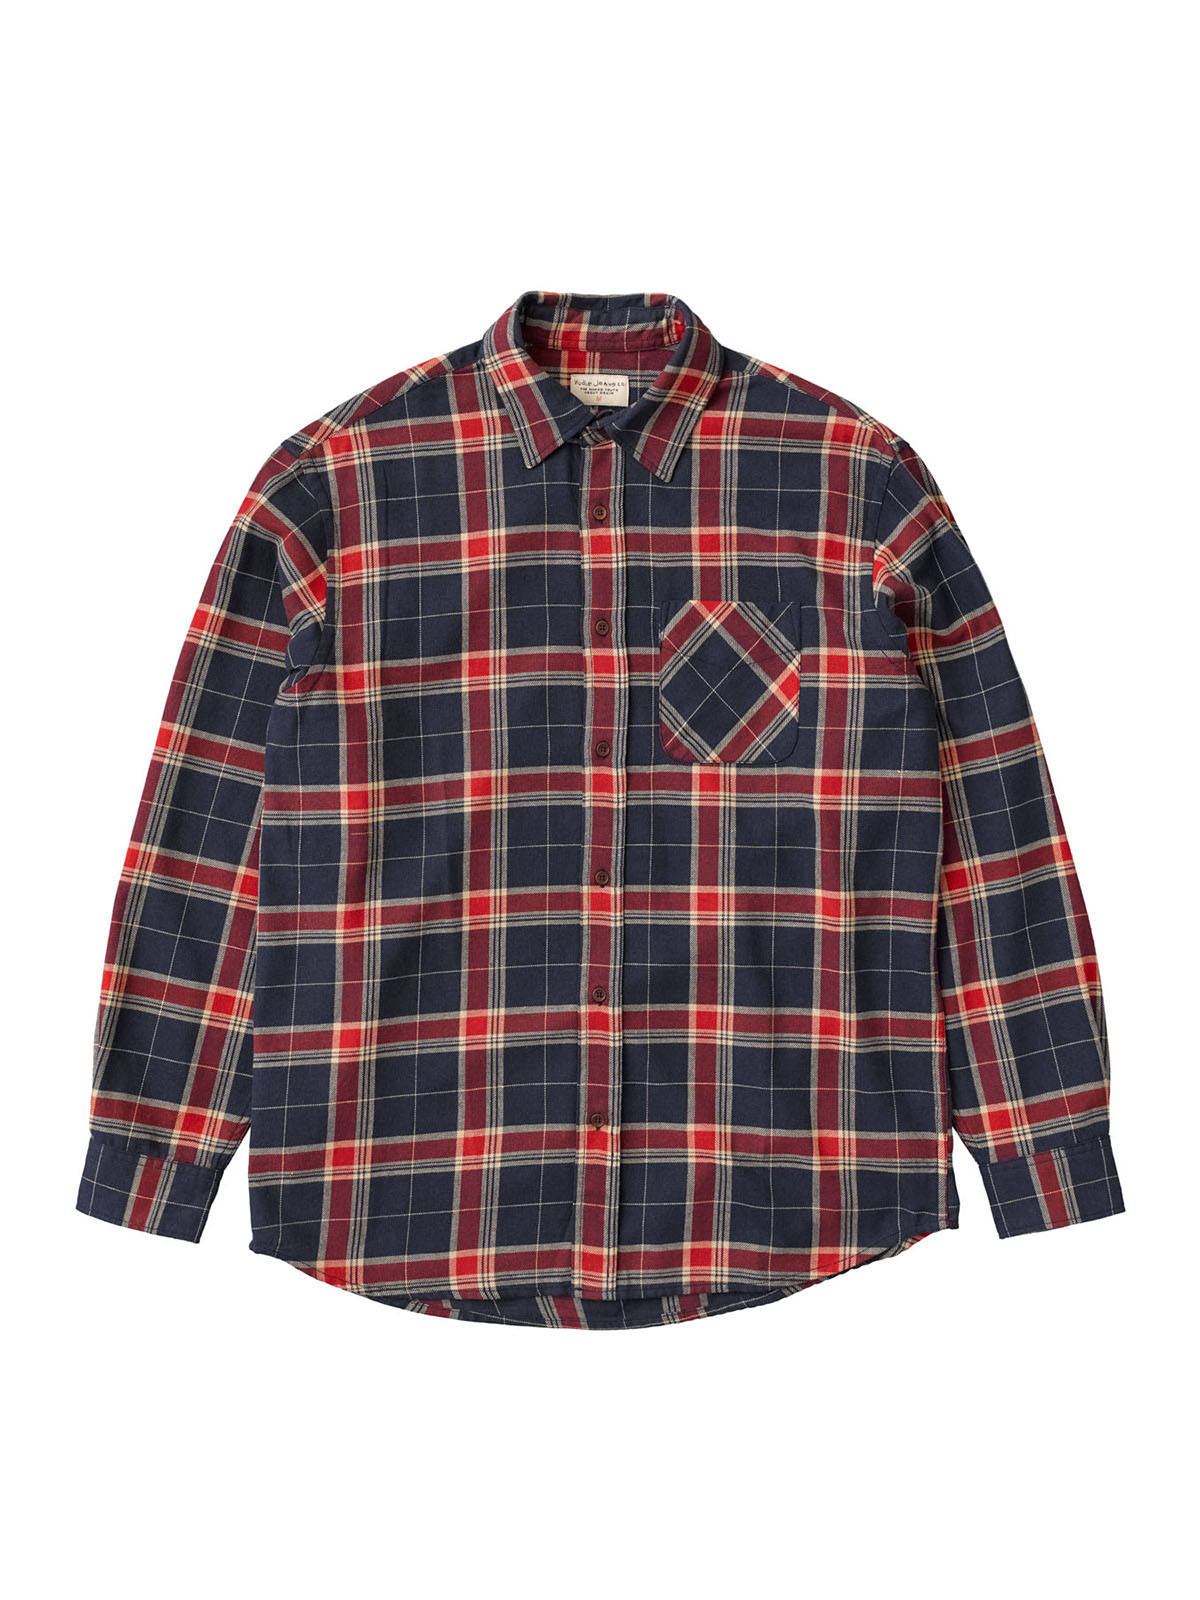 Relaxed flannel shirt